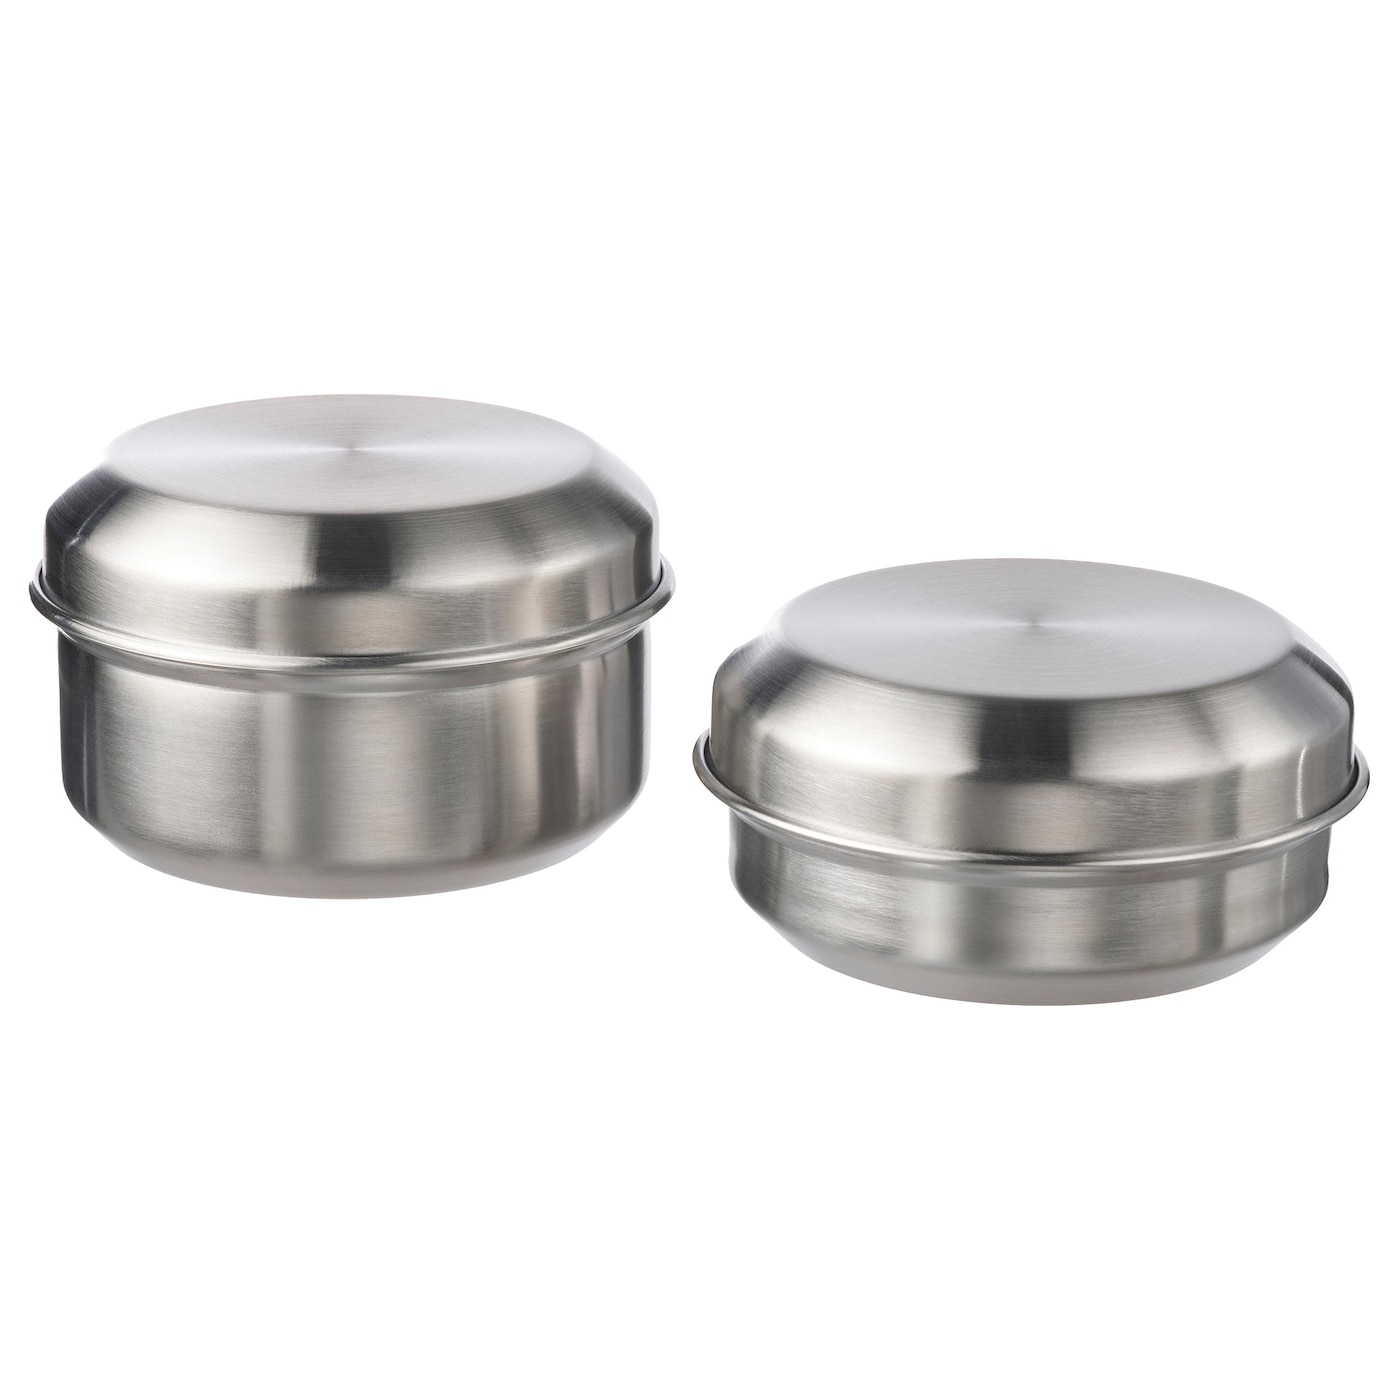 LÄTTUGGAD snack container, set of 2 stainless steel - IKEA